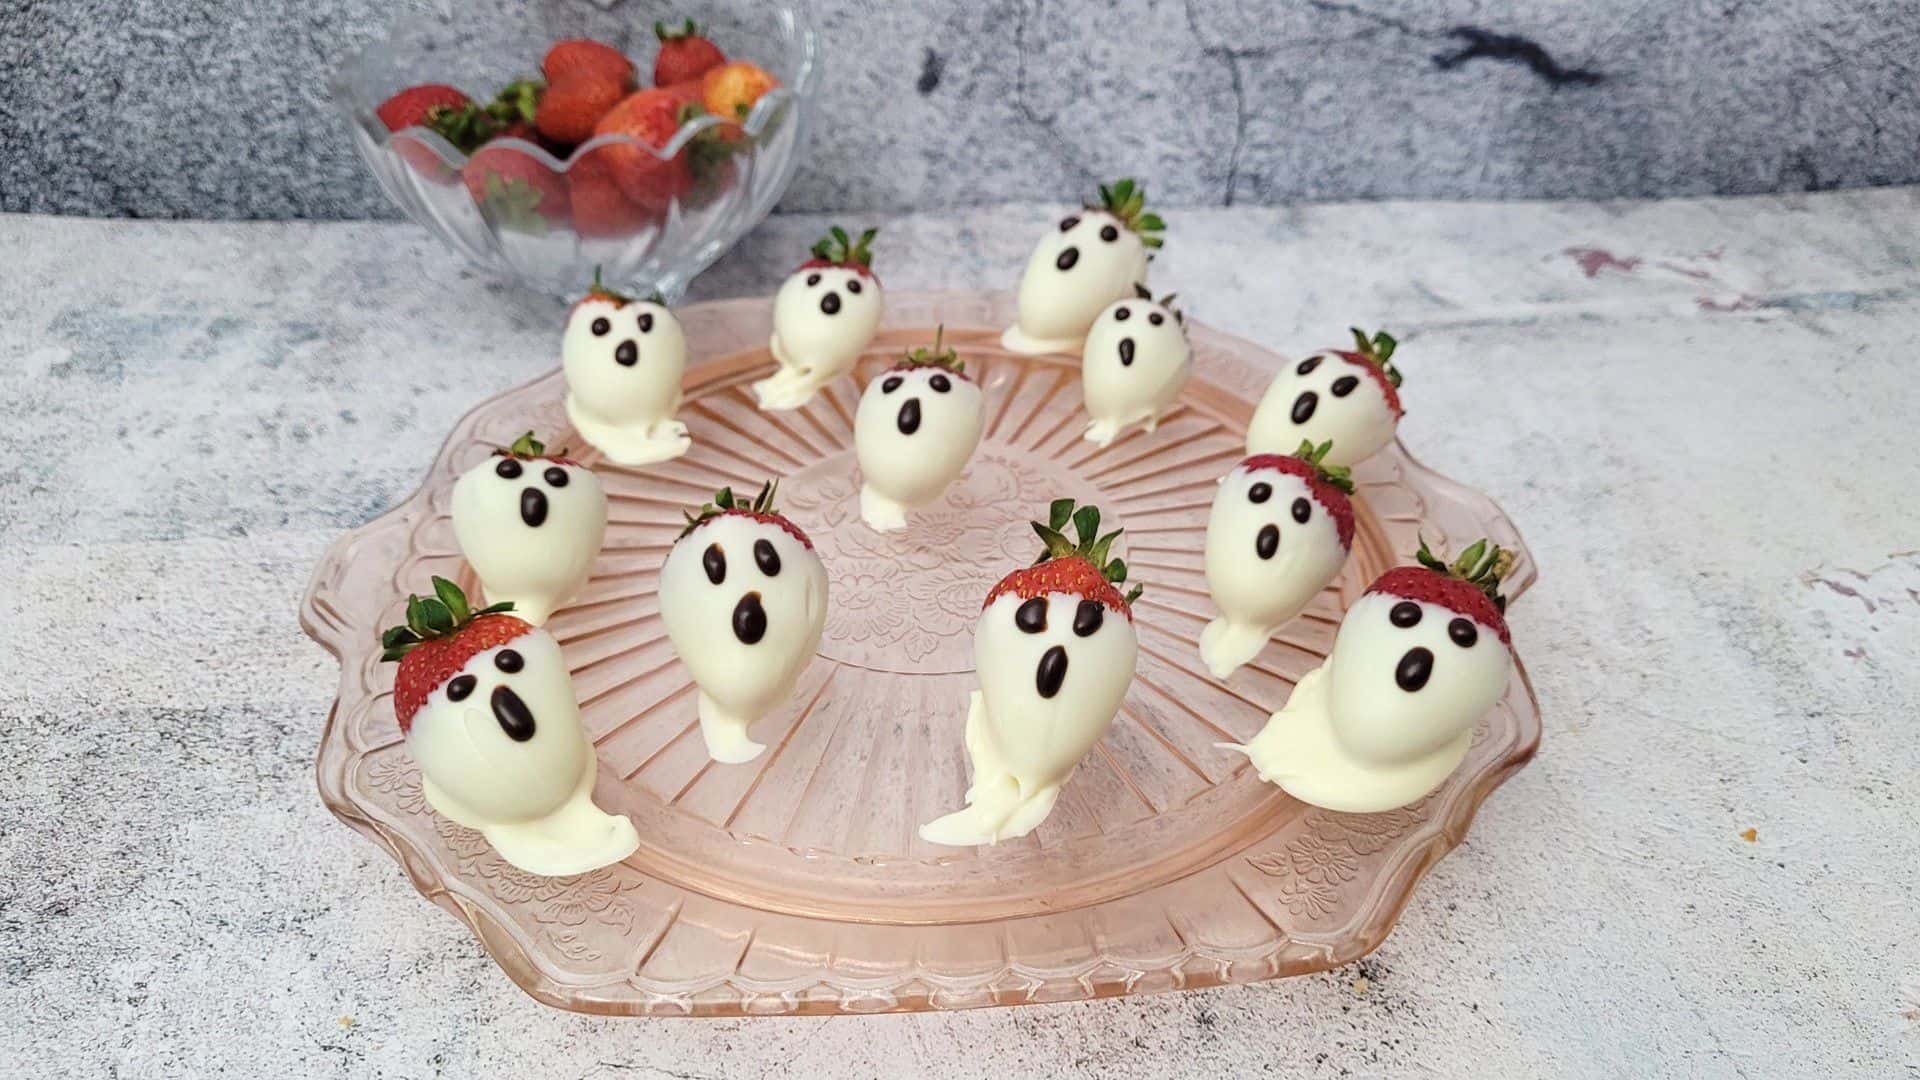 white chocolate covered strawberries with chocolate decorations for Halloween ghosts